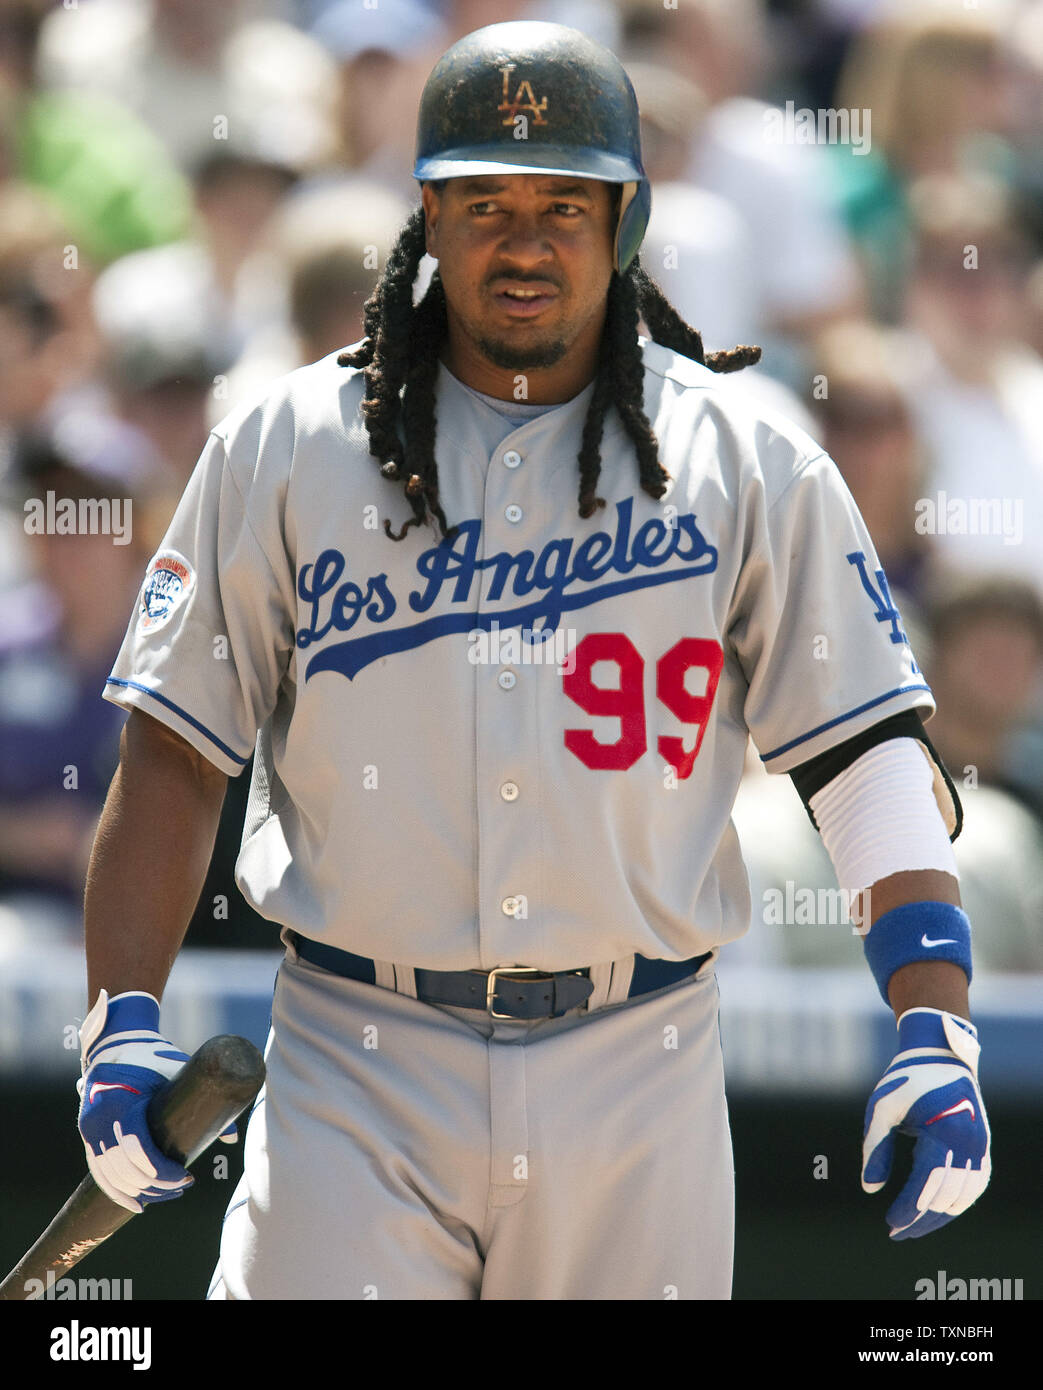 Los Angeles Dodgers left fielder Manny Ramirez walks to the plate as a  pinch hitter during the sixth inning against the Colorado Rockies on his  38th birthday at Coors Field on May